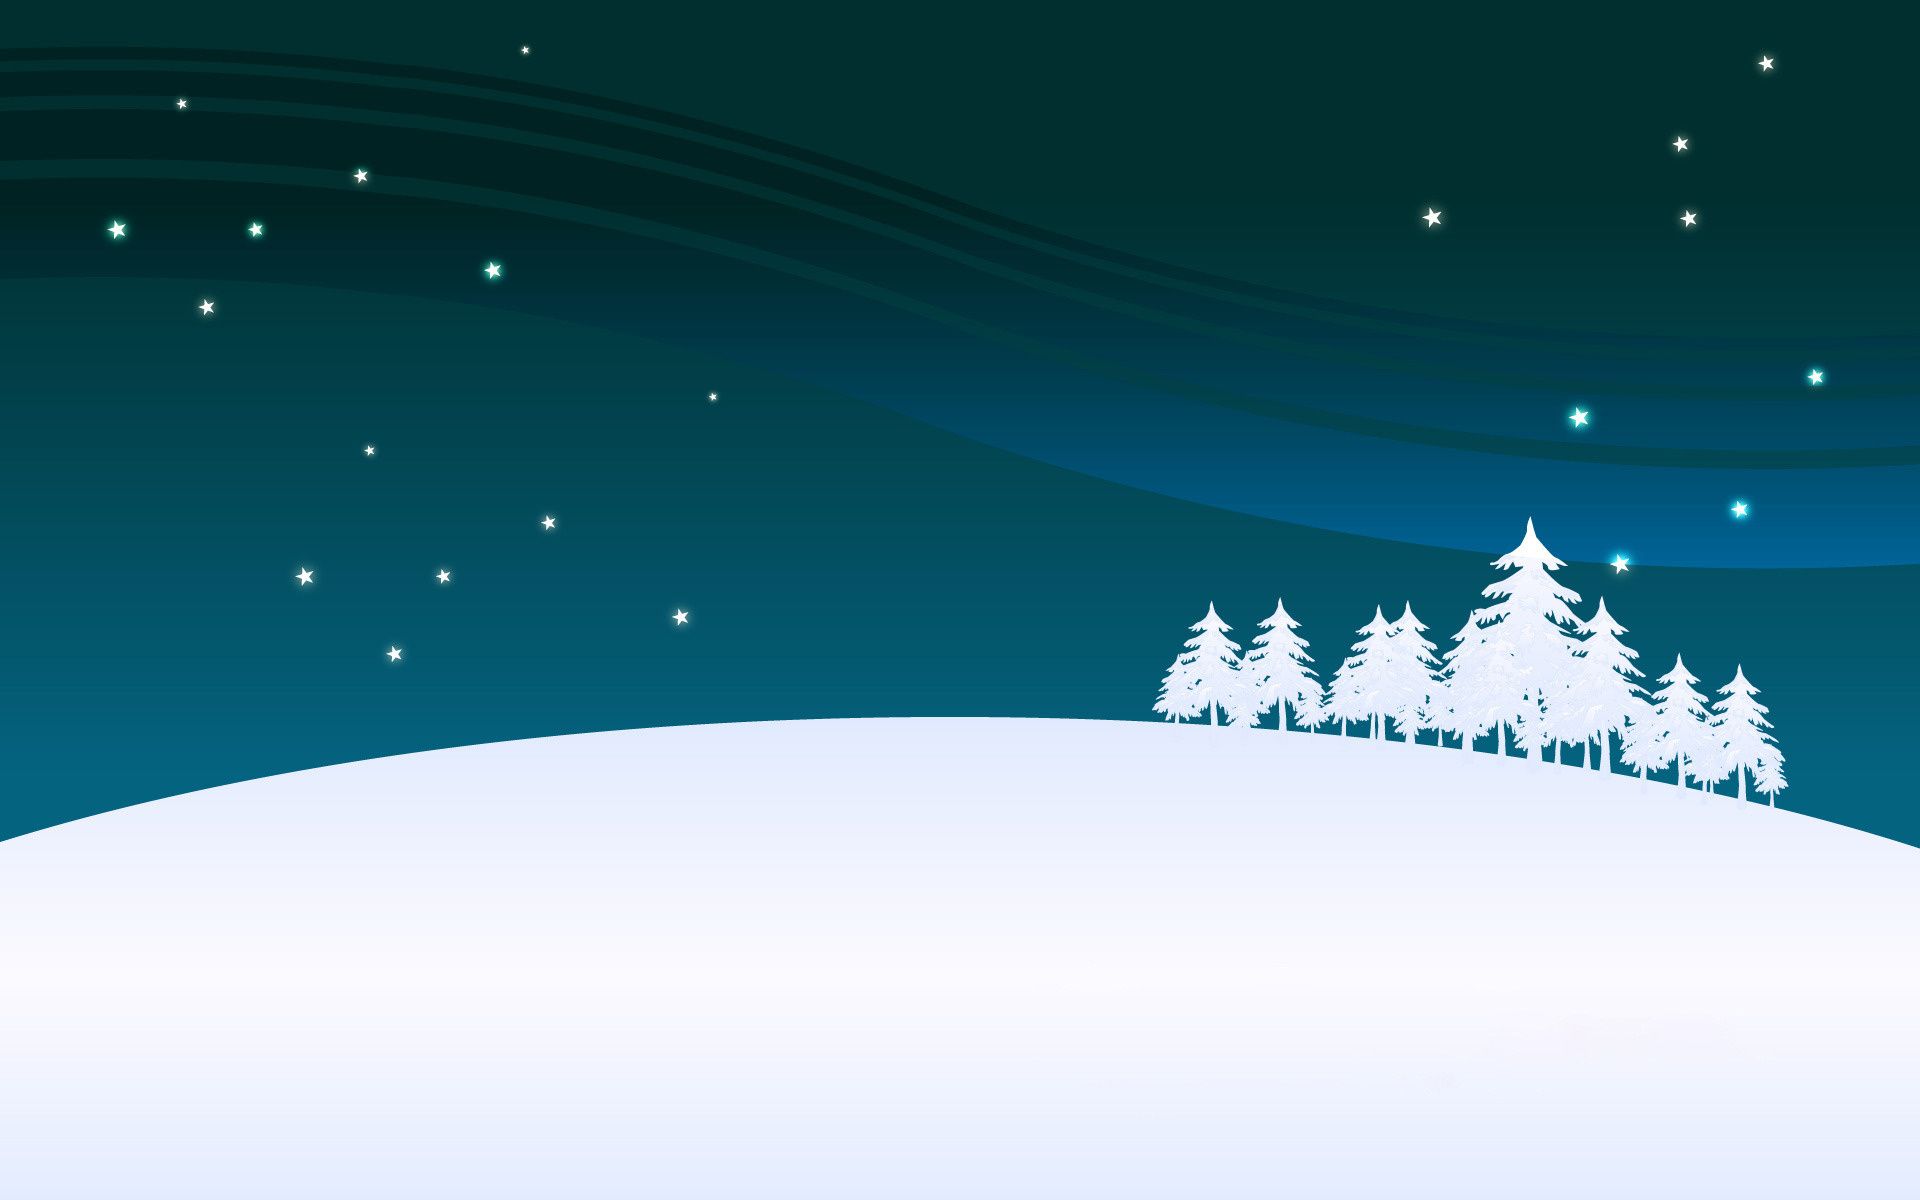 free-download-40-best-holiday-desktop-wallpapers-download-at